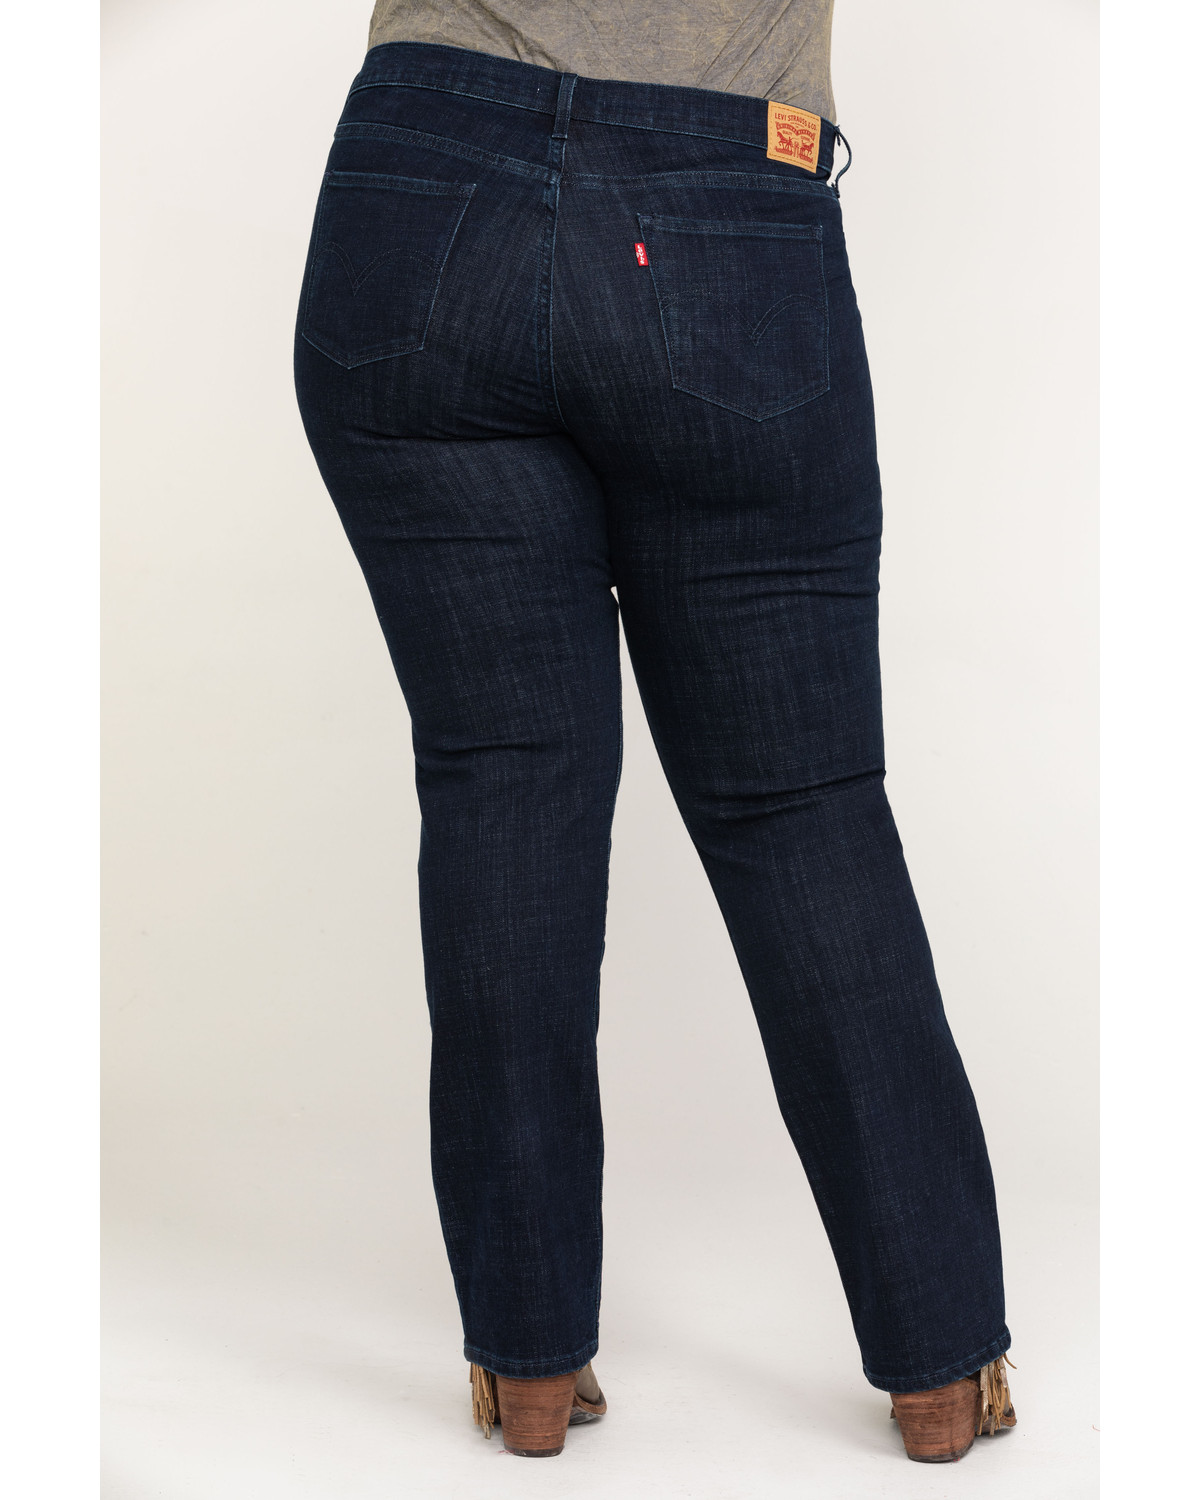 levi's classic straight jeans